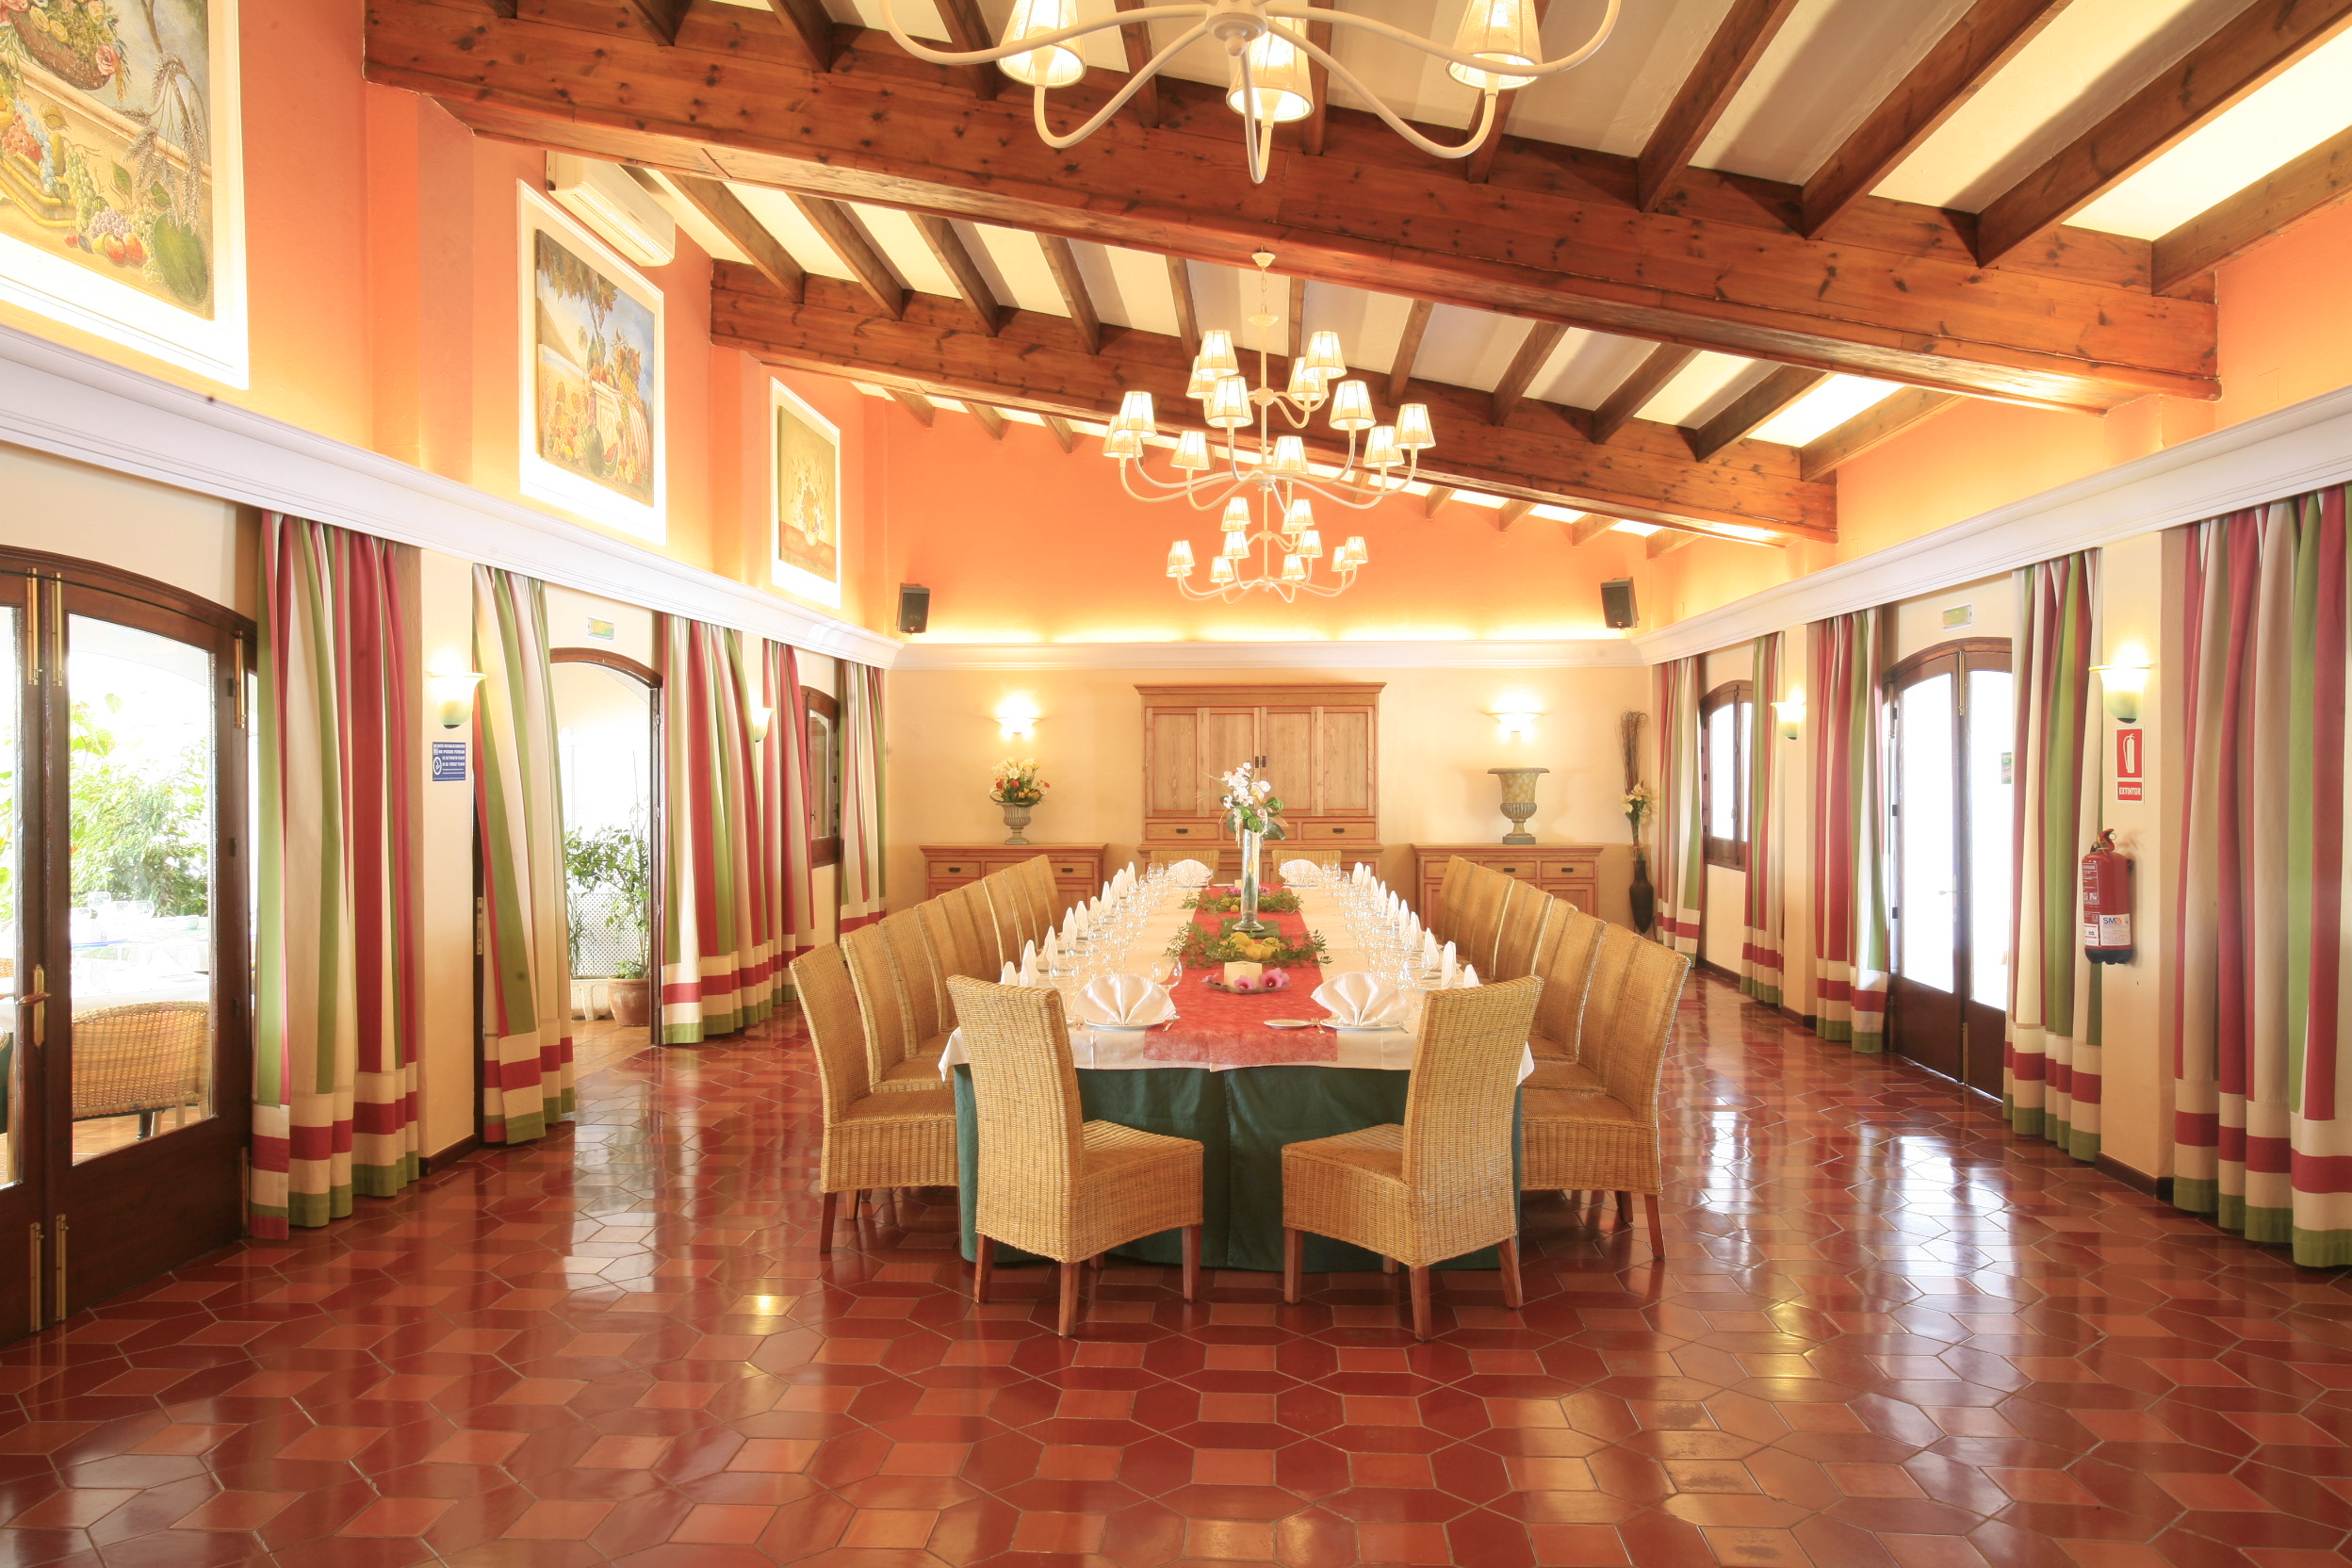 1st floor dining room set up in Bar-Restaurant with swimming pool and leisure area in Son Bou